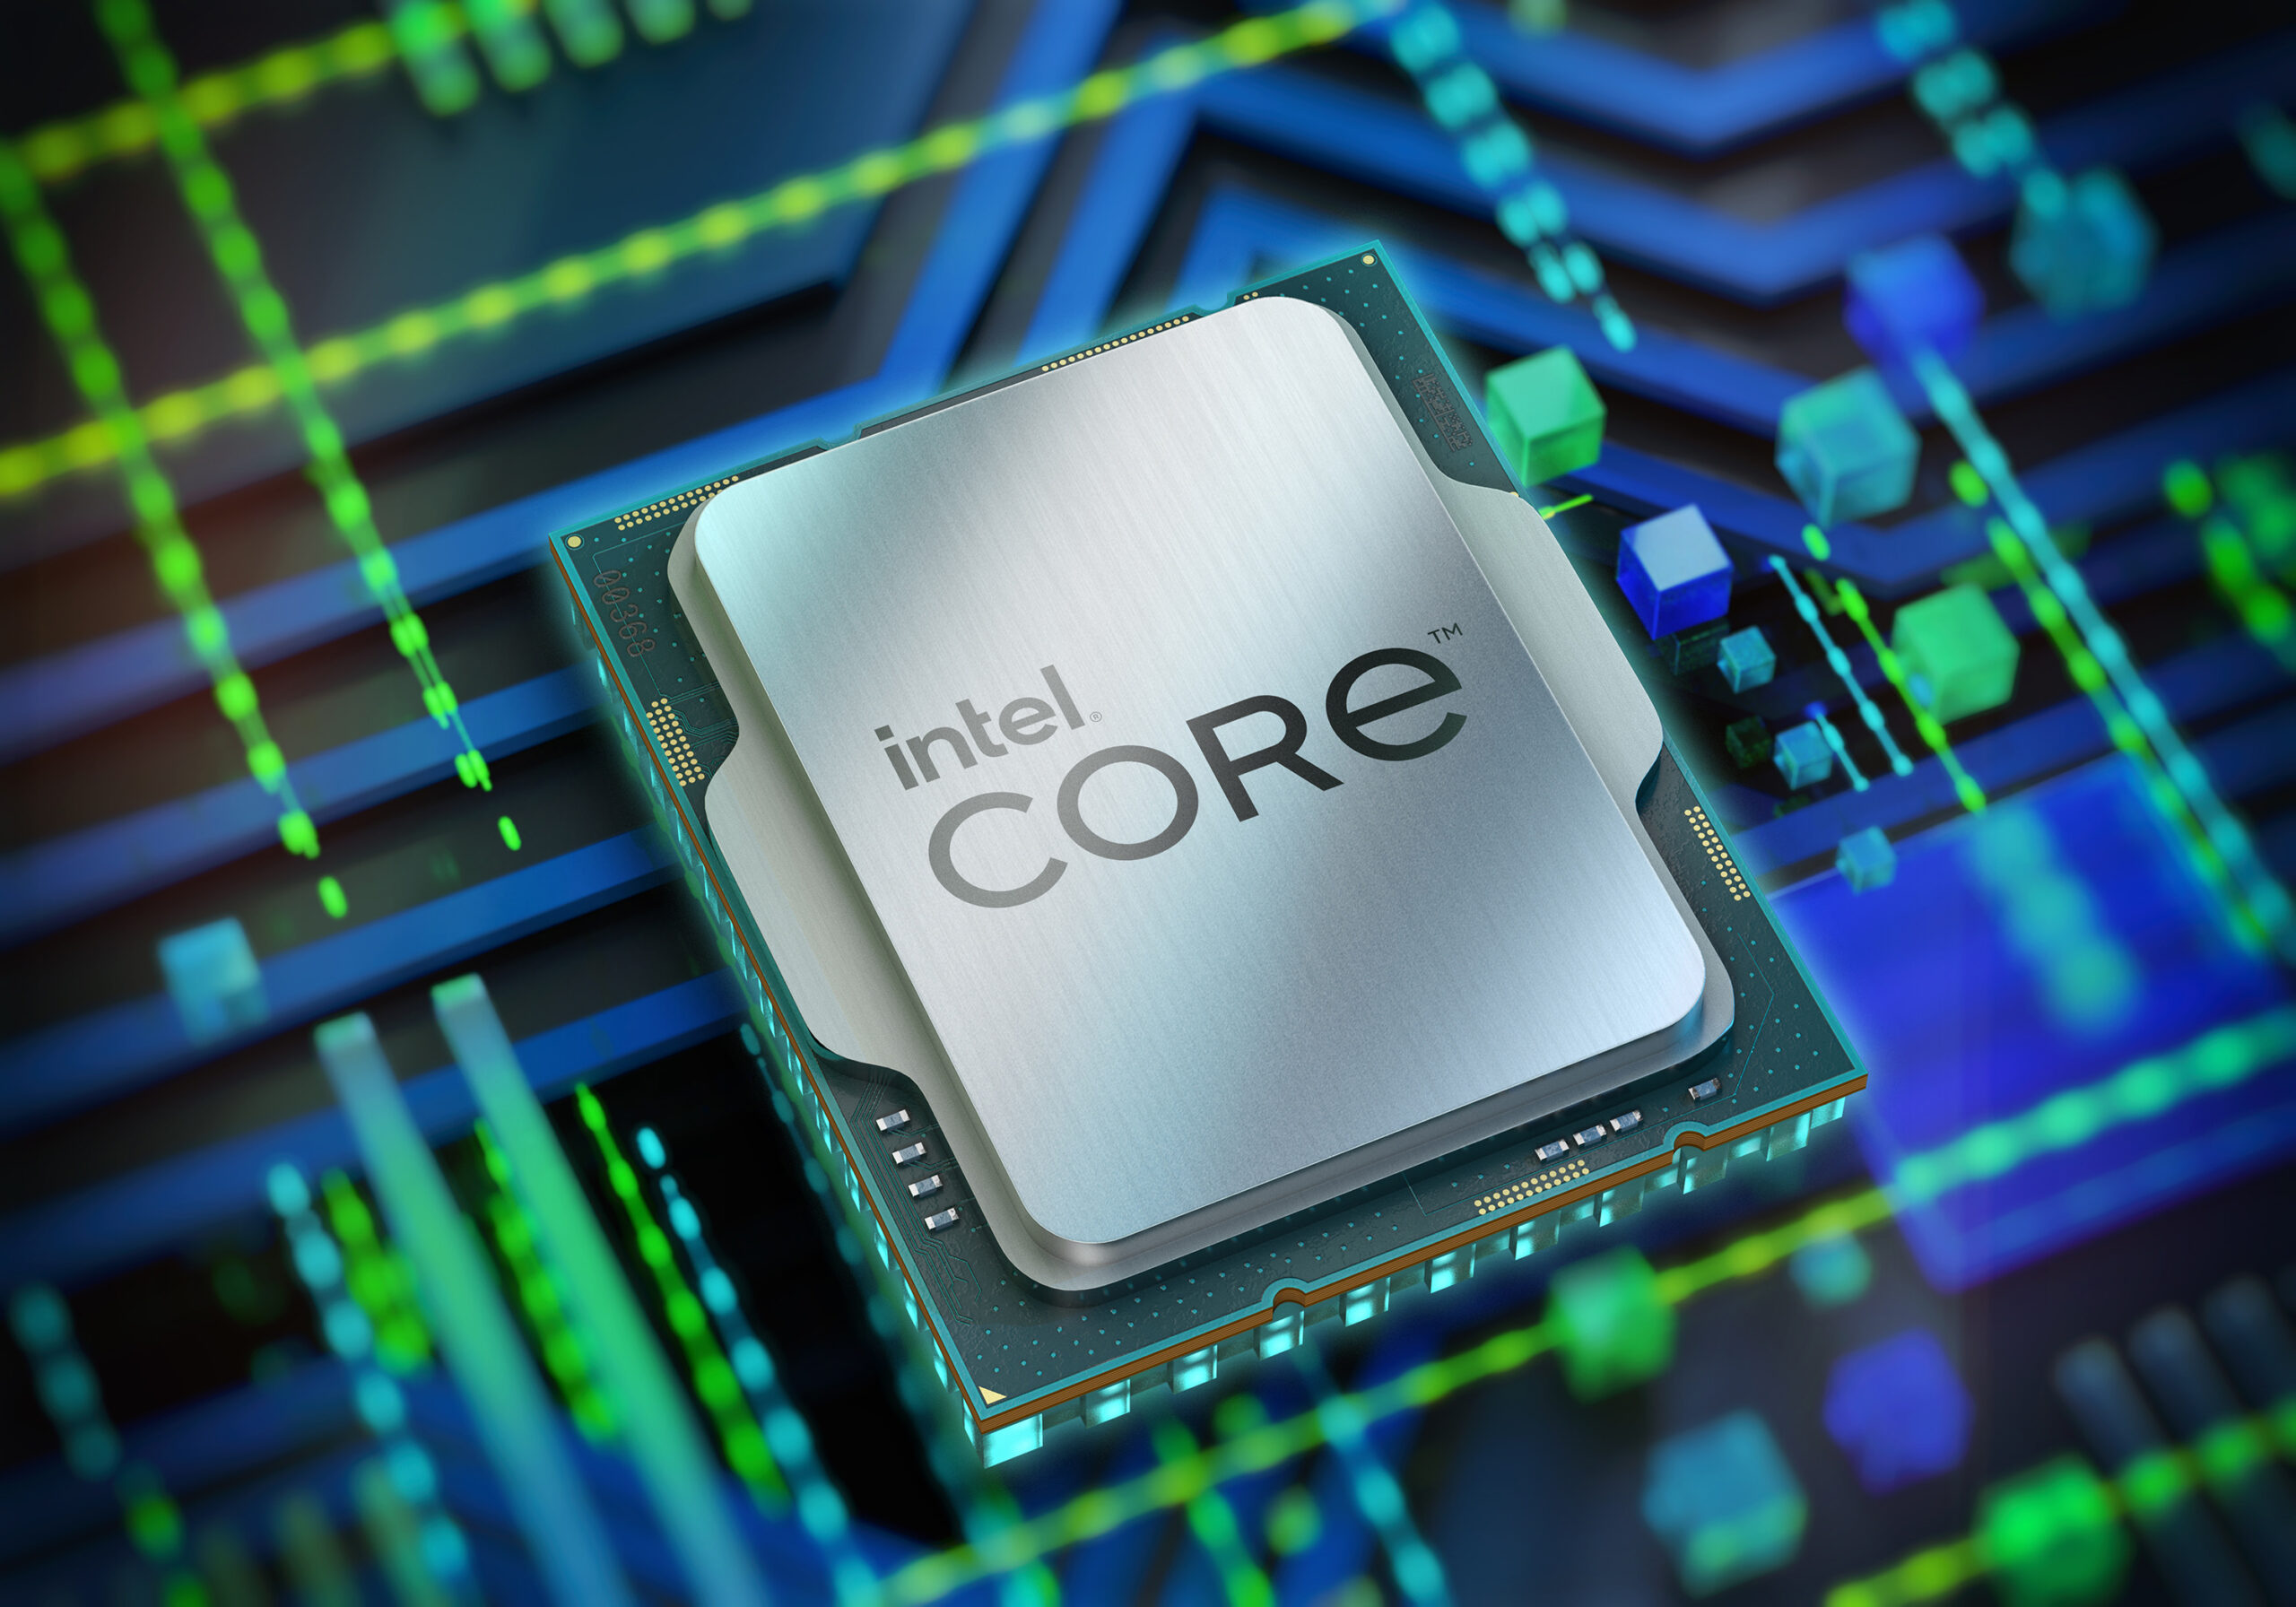 Intel 13th Gen Raptor Lake Core i9-13900K With 24 Cores & 32 Threads Spotted Within The Ashes of The Singularity Benchmark